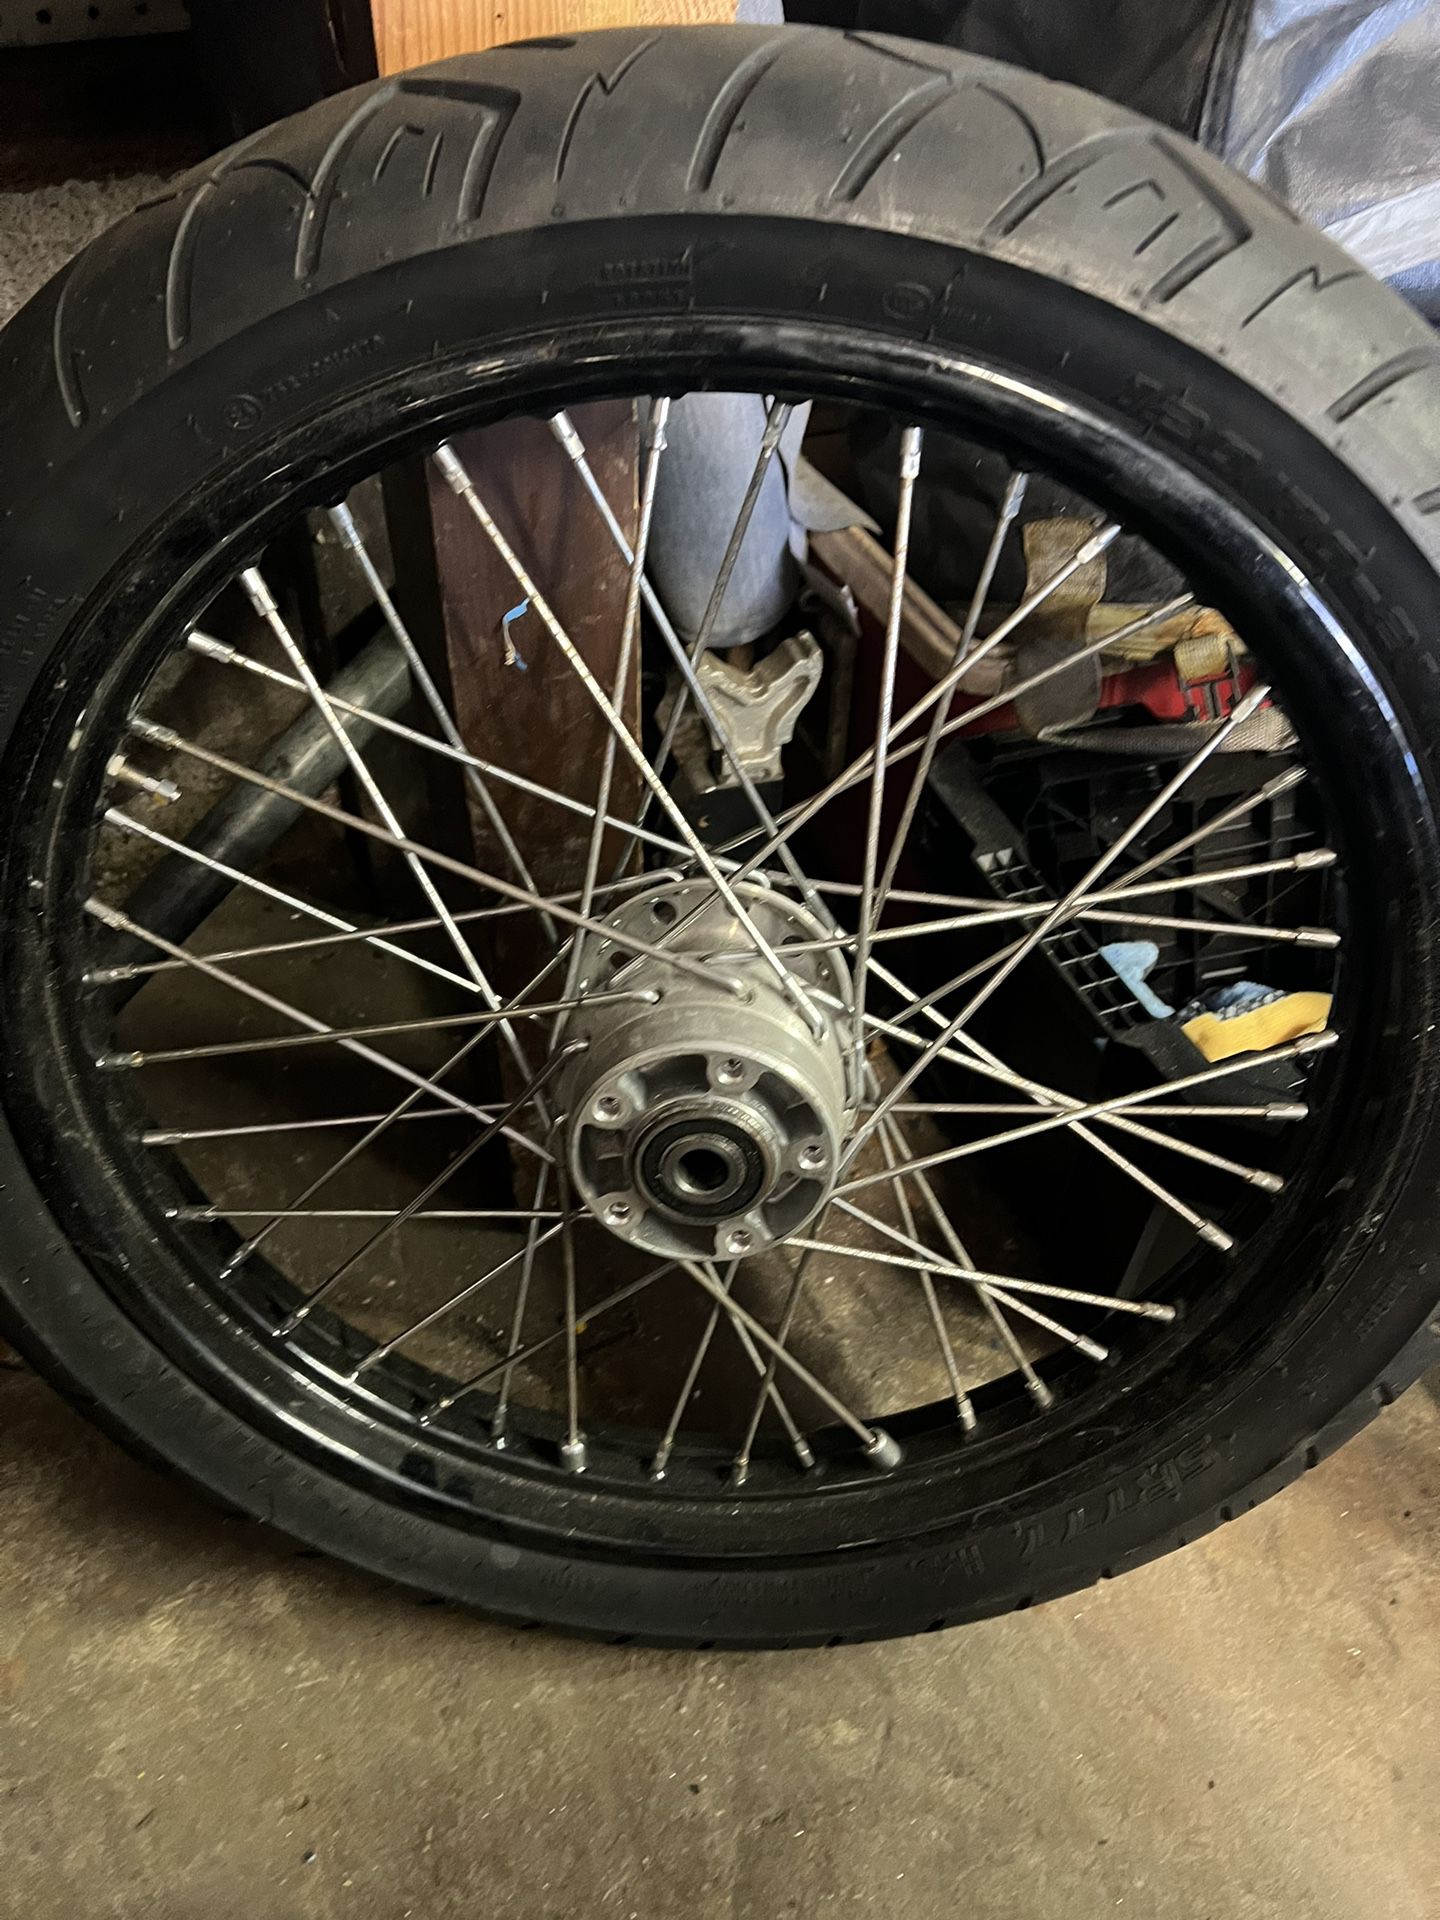 Harley Davidson 21 Inch Front Wheel With New Tire